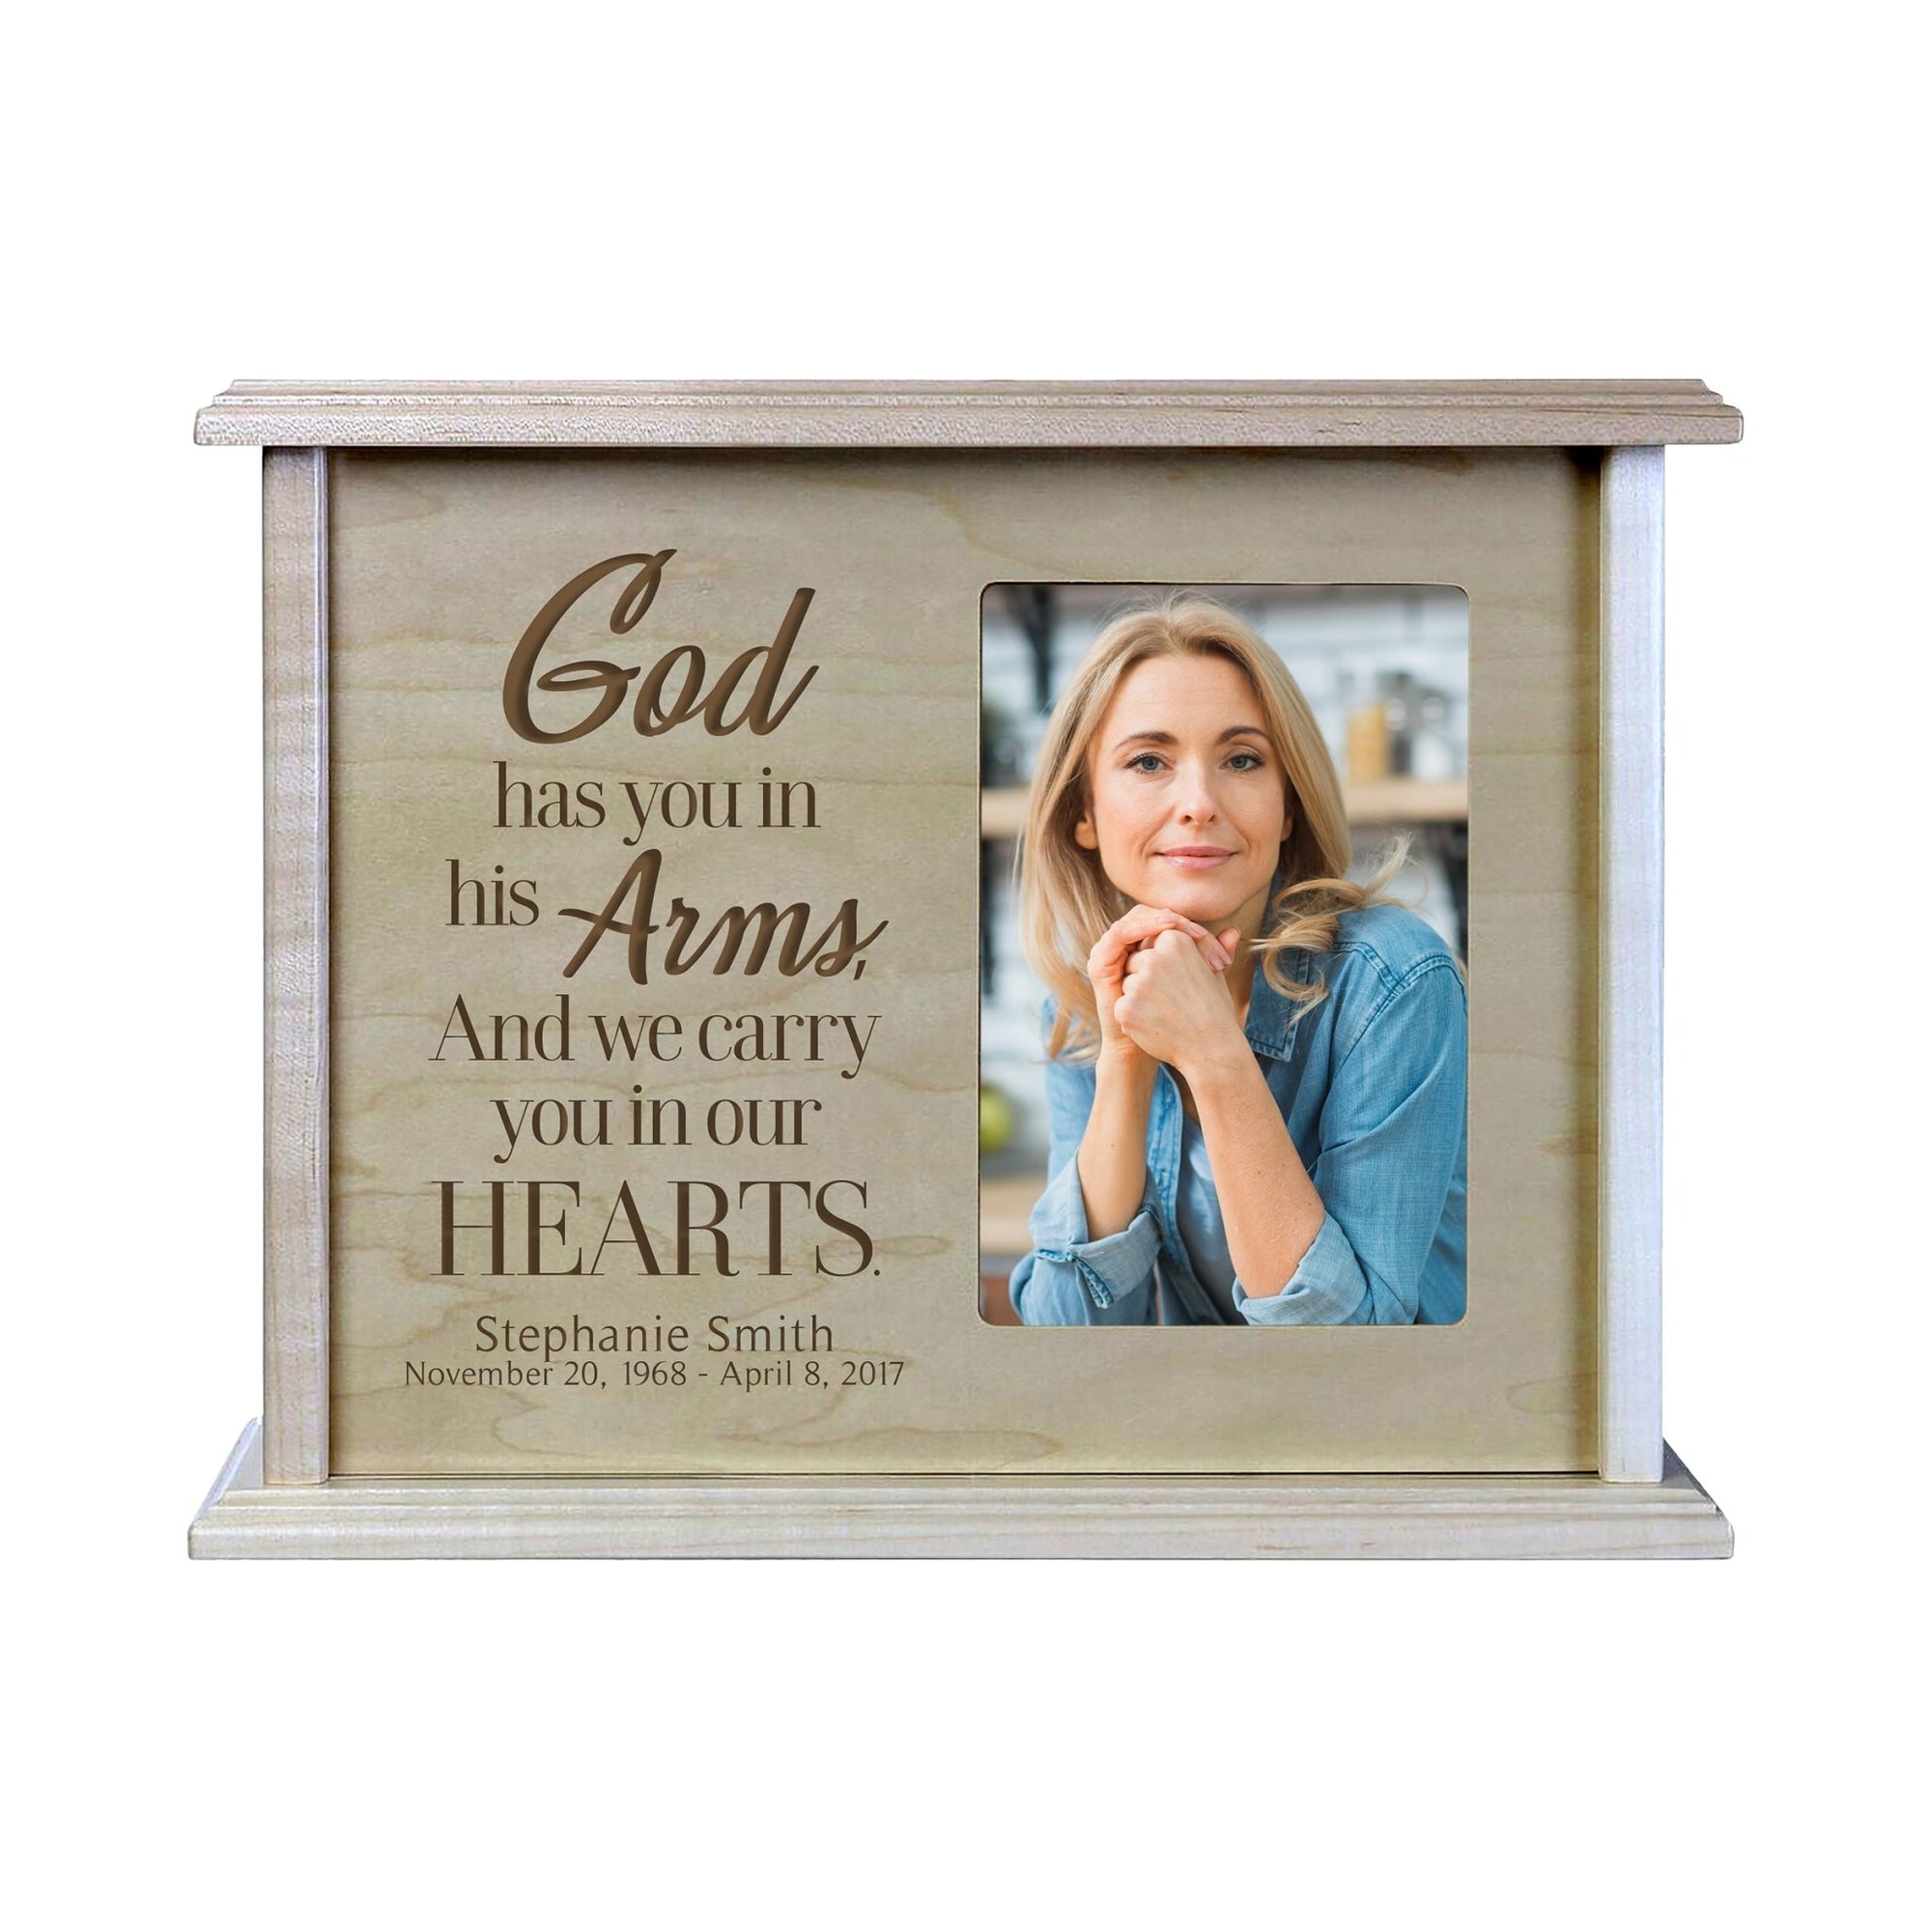 Custom Photo Cremation Urn Box for Human Ashes